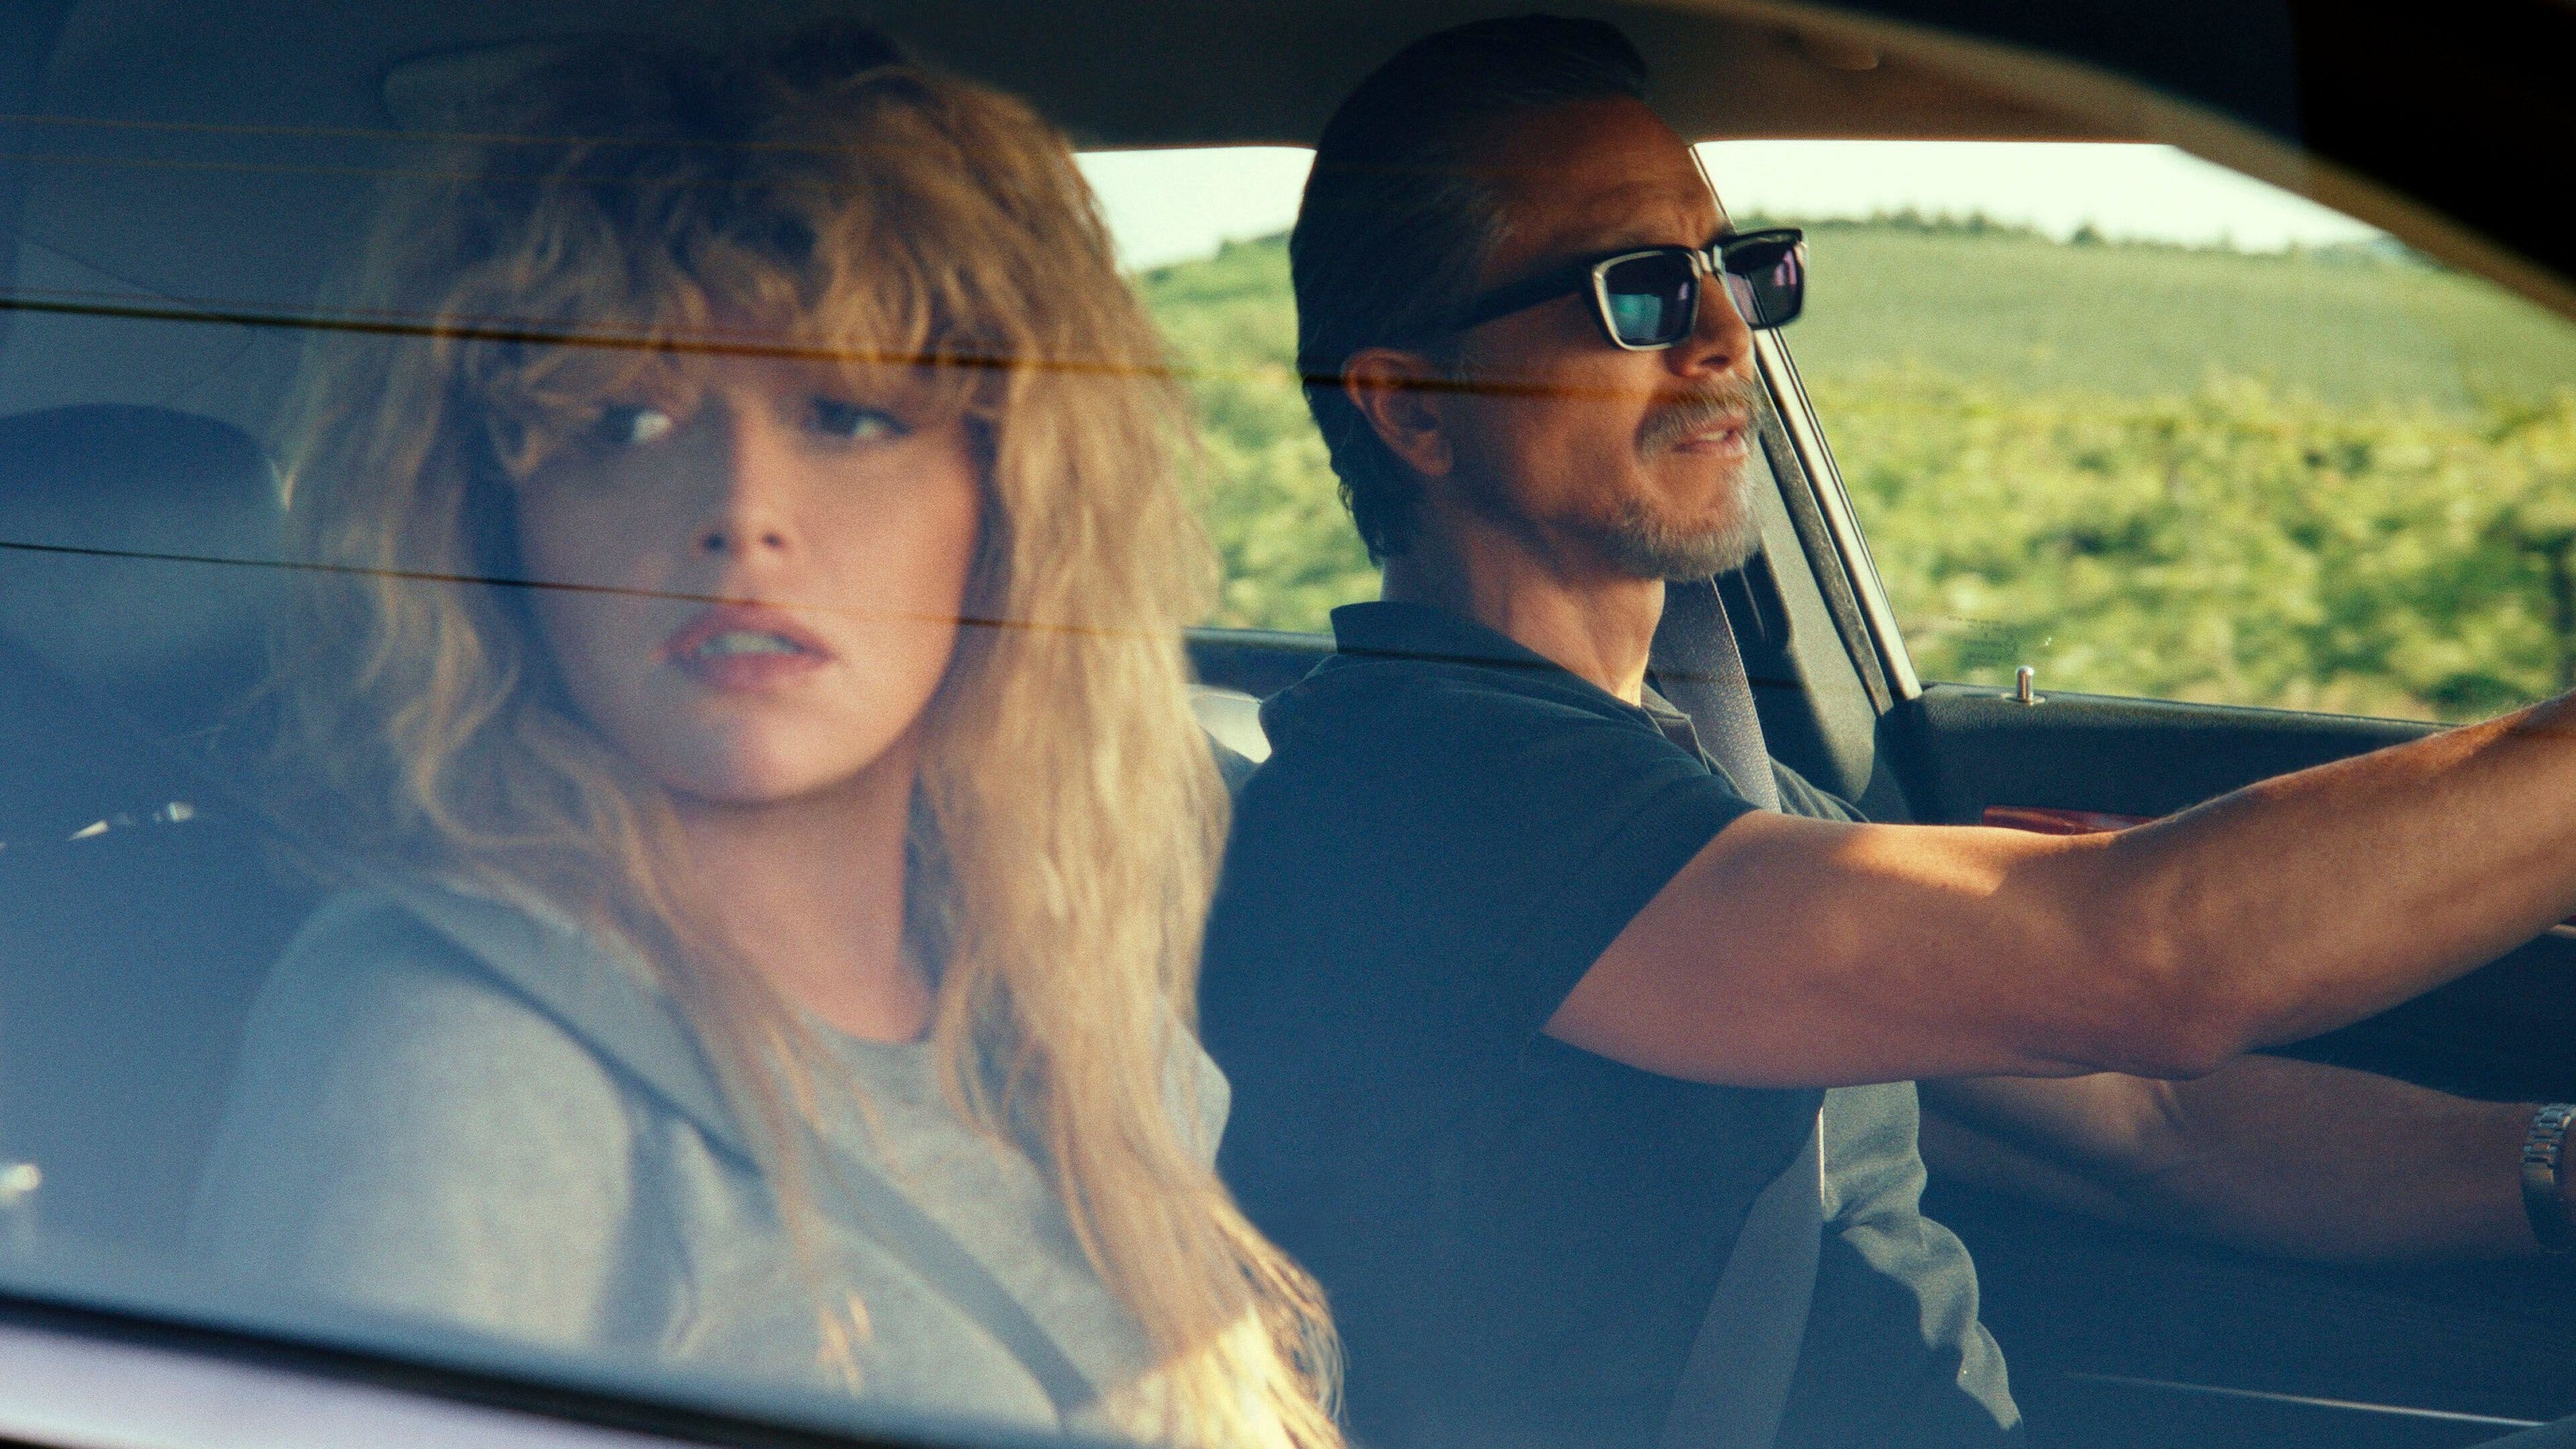 A concerned blonde woman rides next to an intense bearded man driving a car